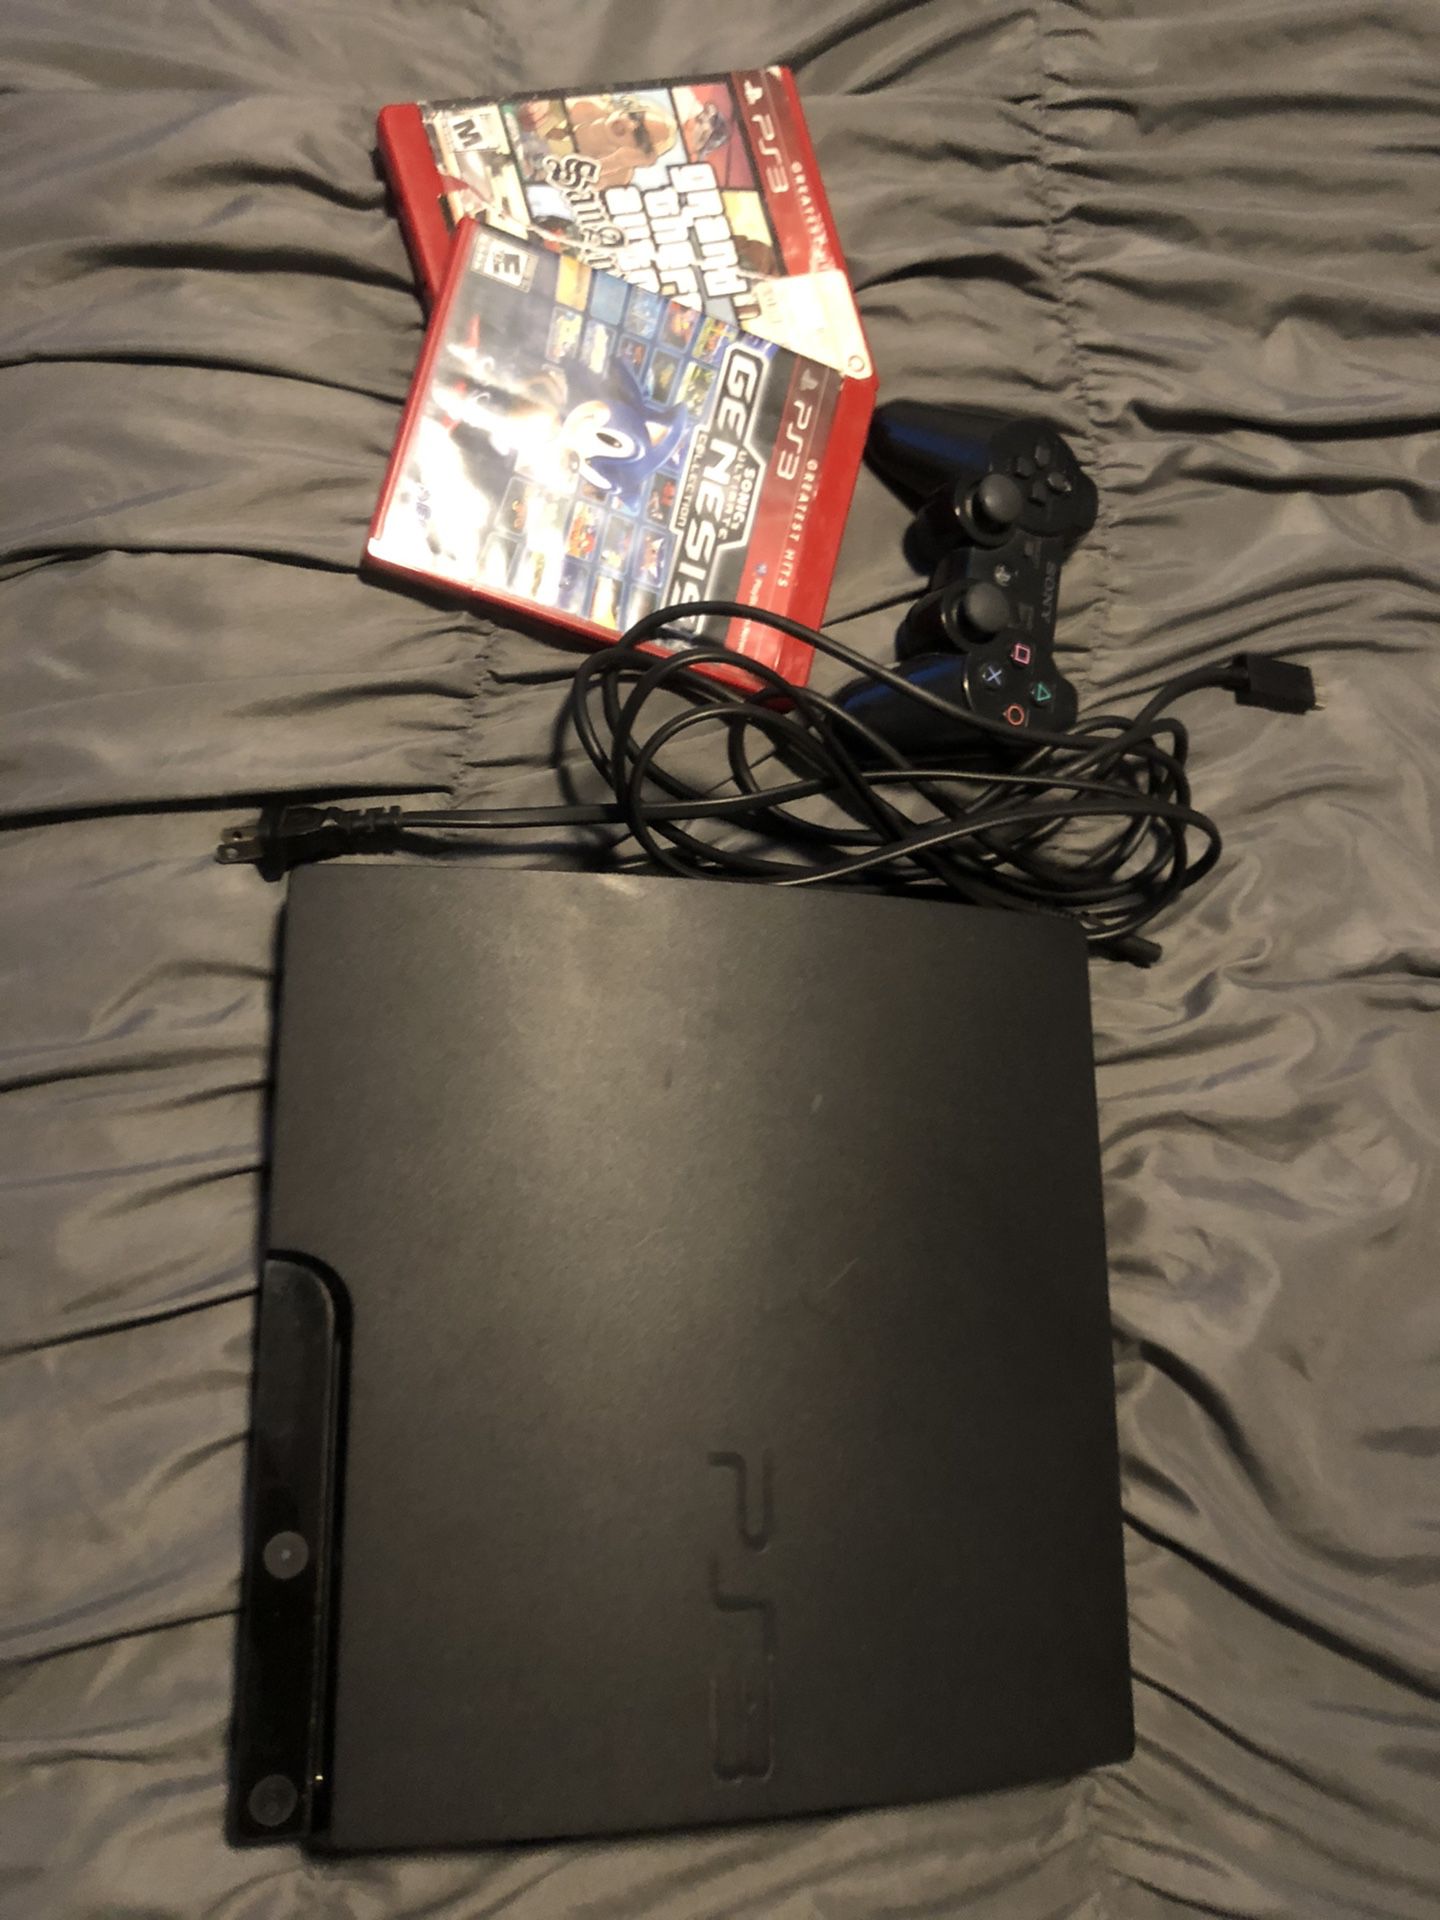 PS3 and 2 games